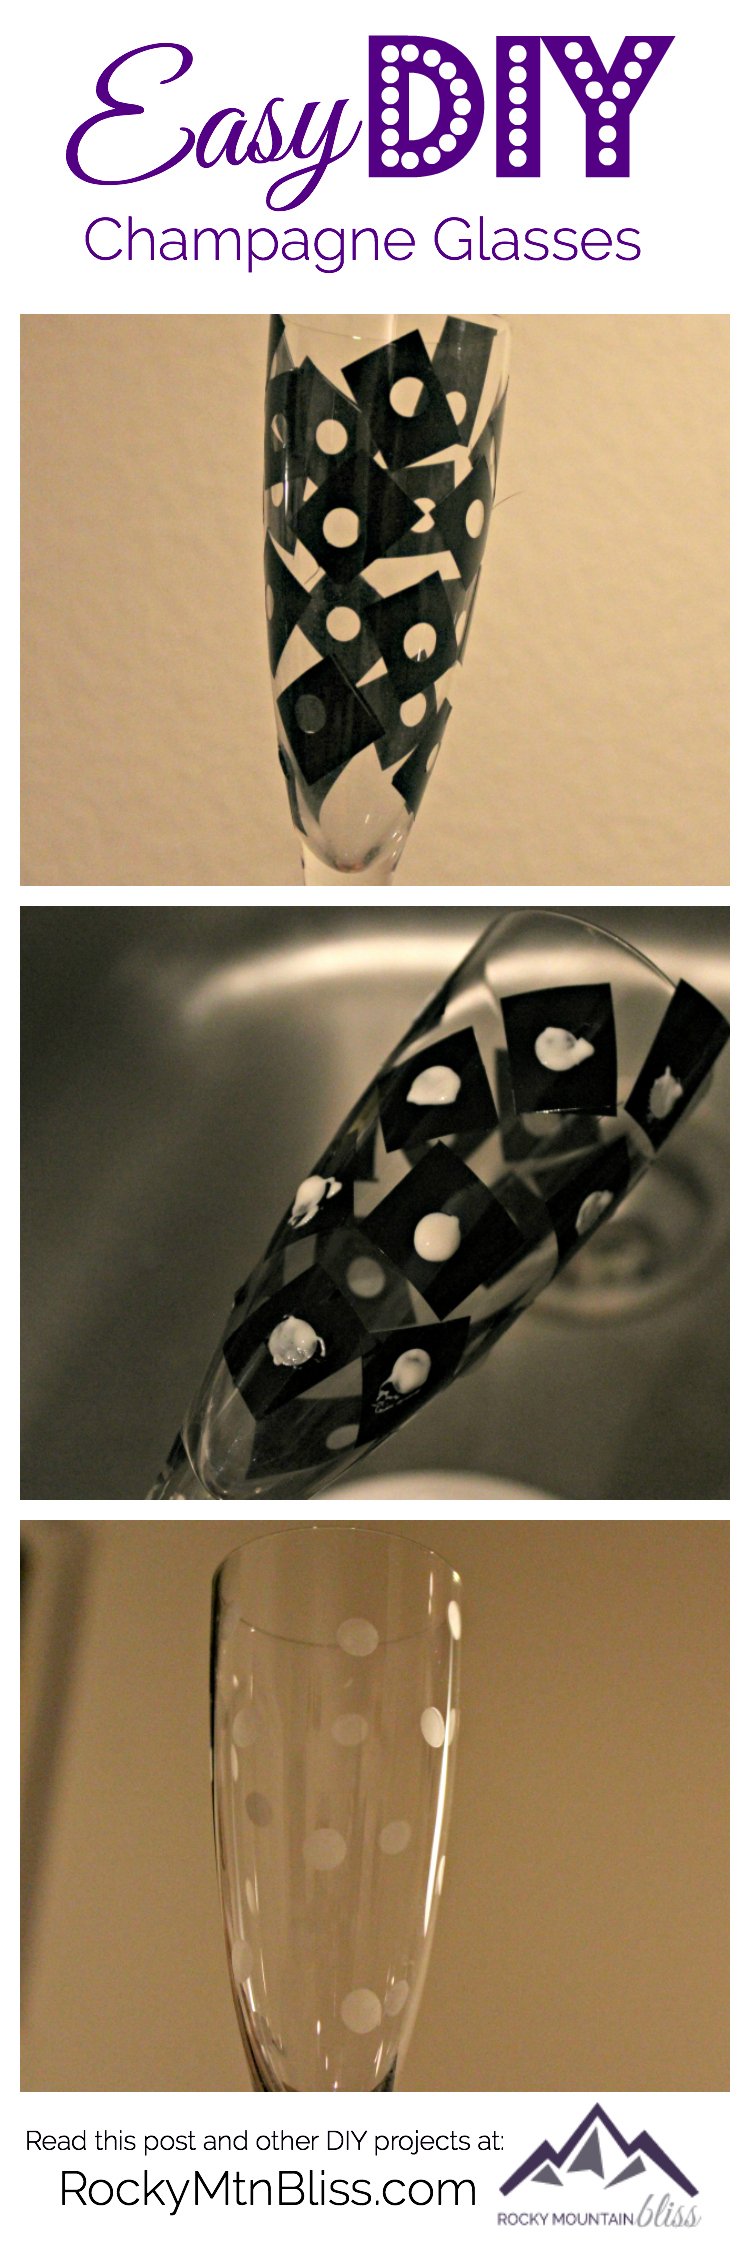 Make your own designer look-a-like champagne glasses for New Years Eve with this easy tutorial from RockyMtnBliss.com